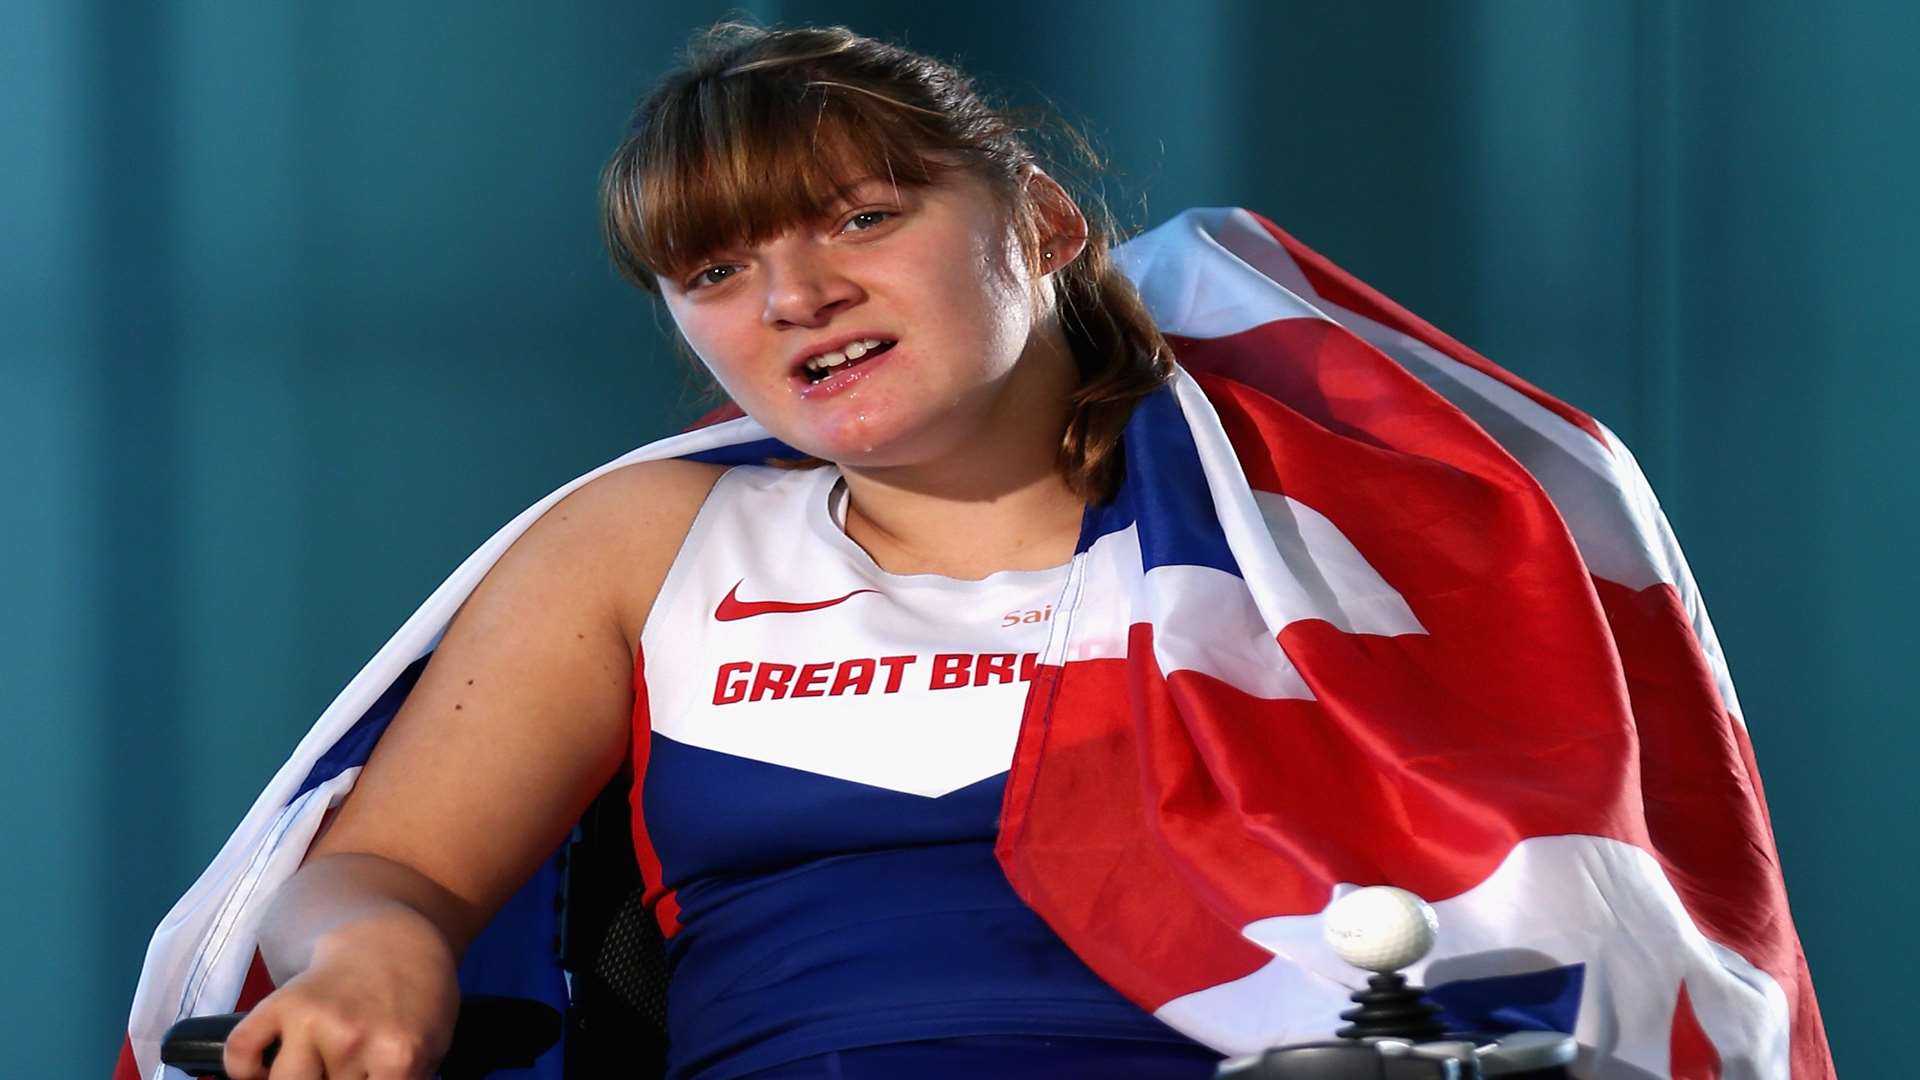 Abbie Hunnisett is part of the paralympic team